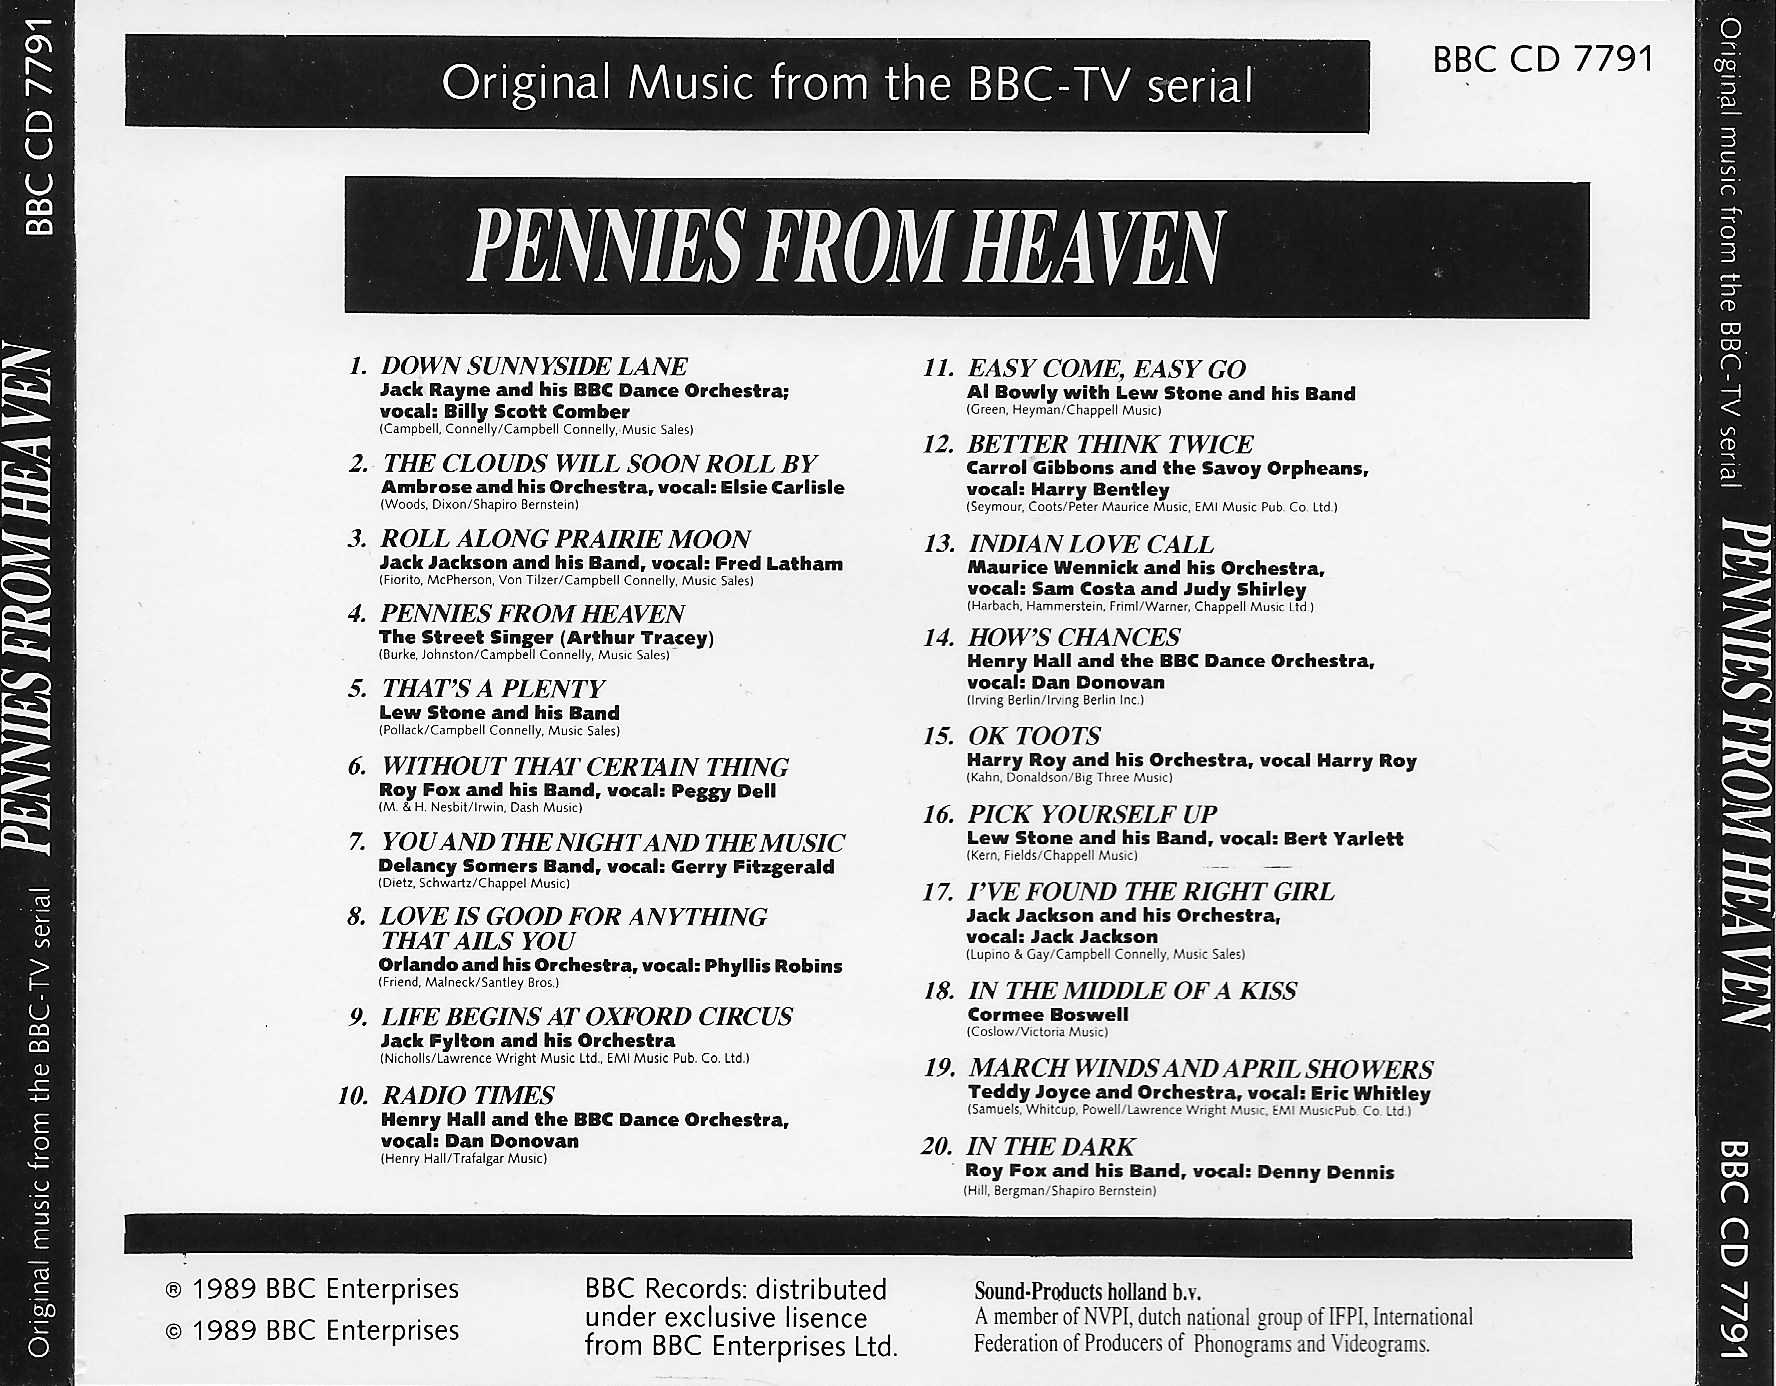 Picture of BBCCD7791 Pennies from Heaven by artist Various from the BBC records and Tapes library